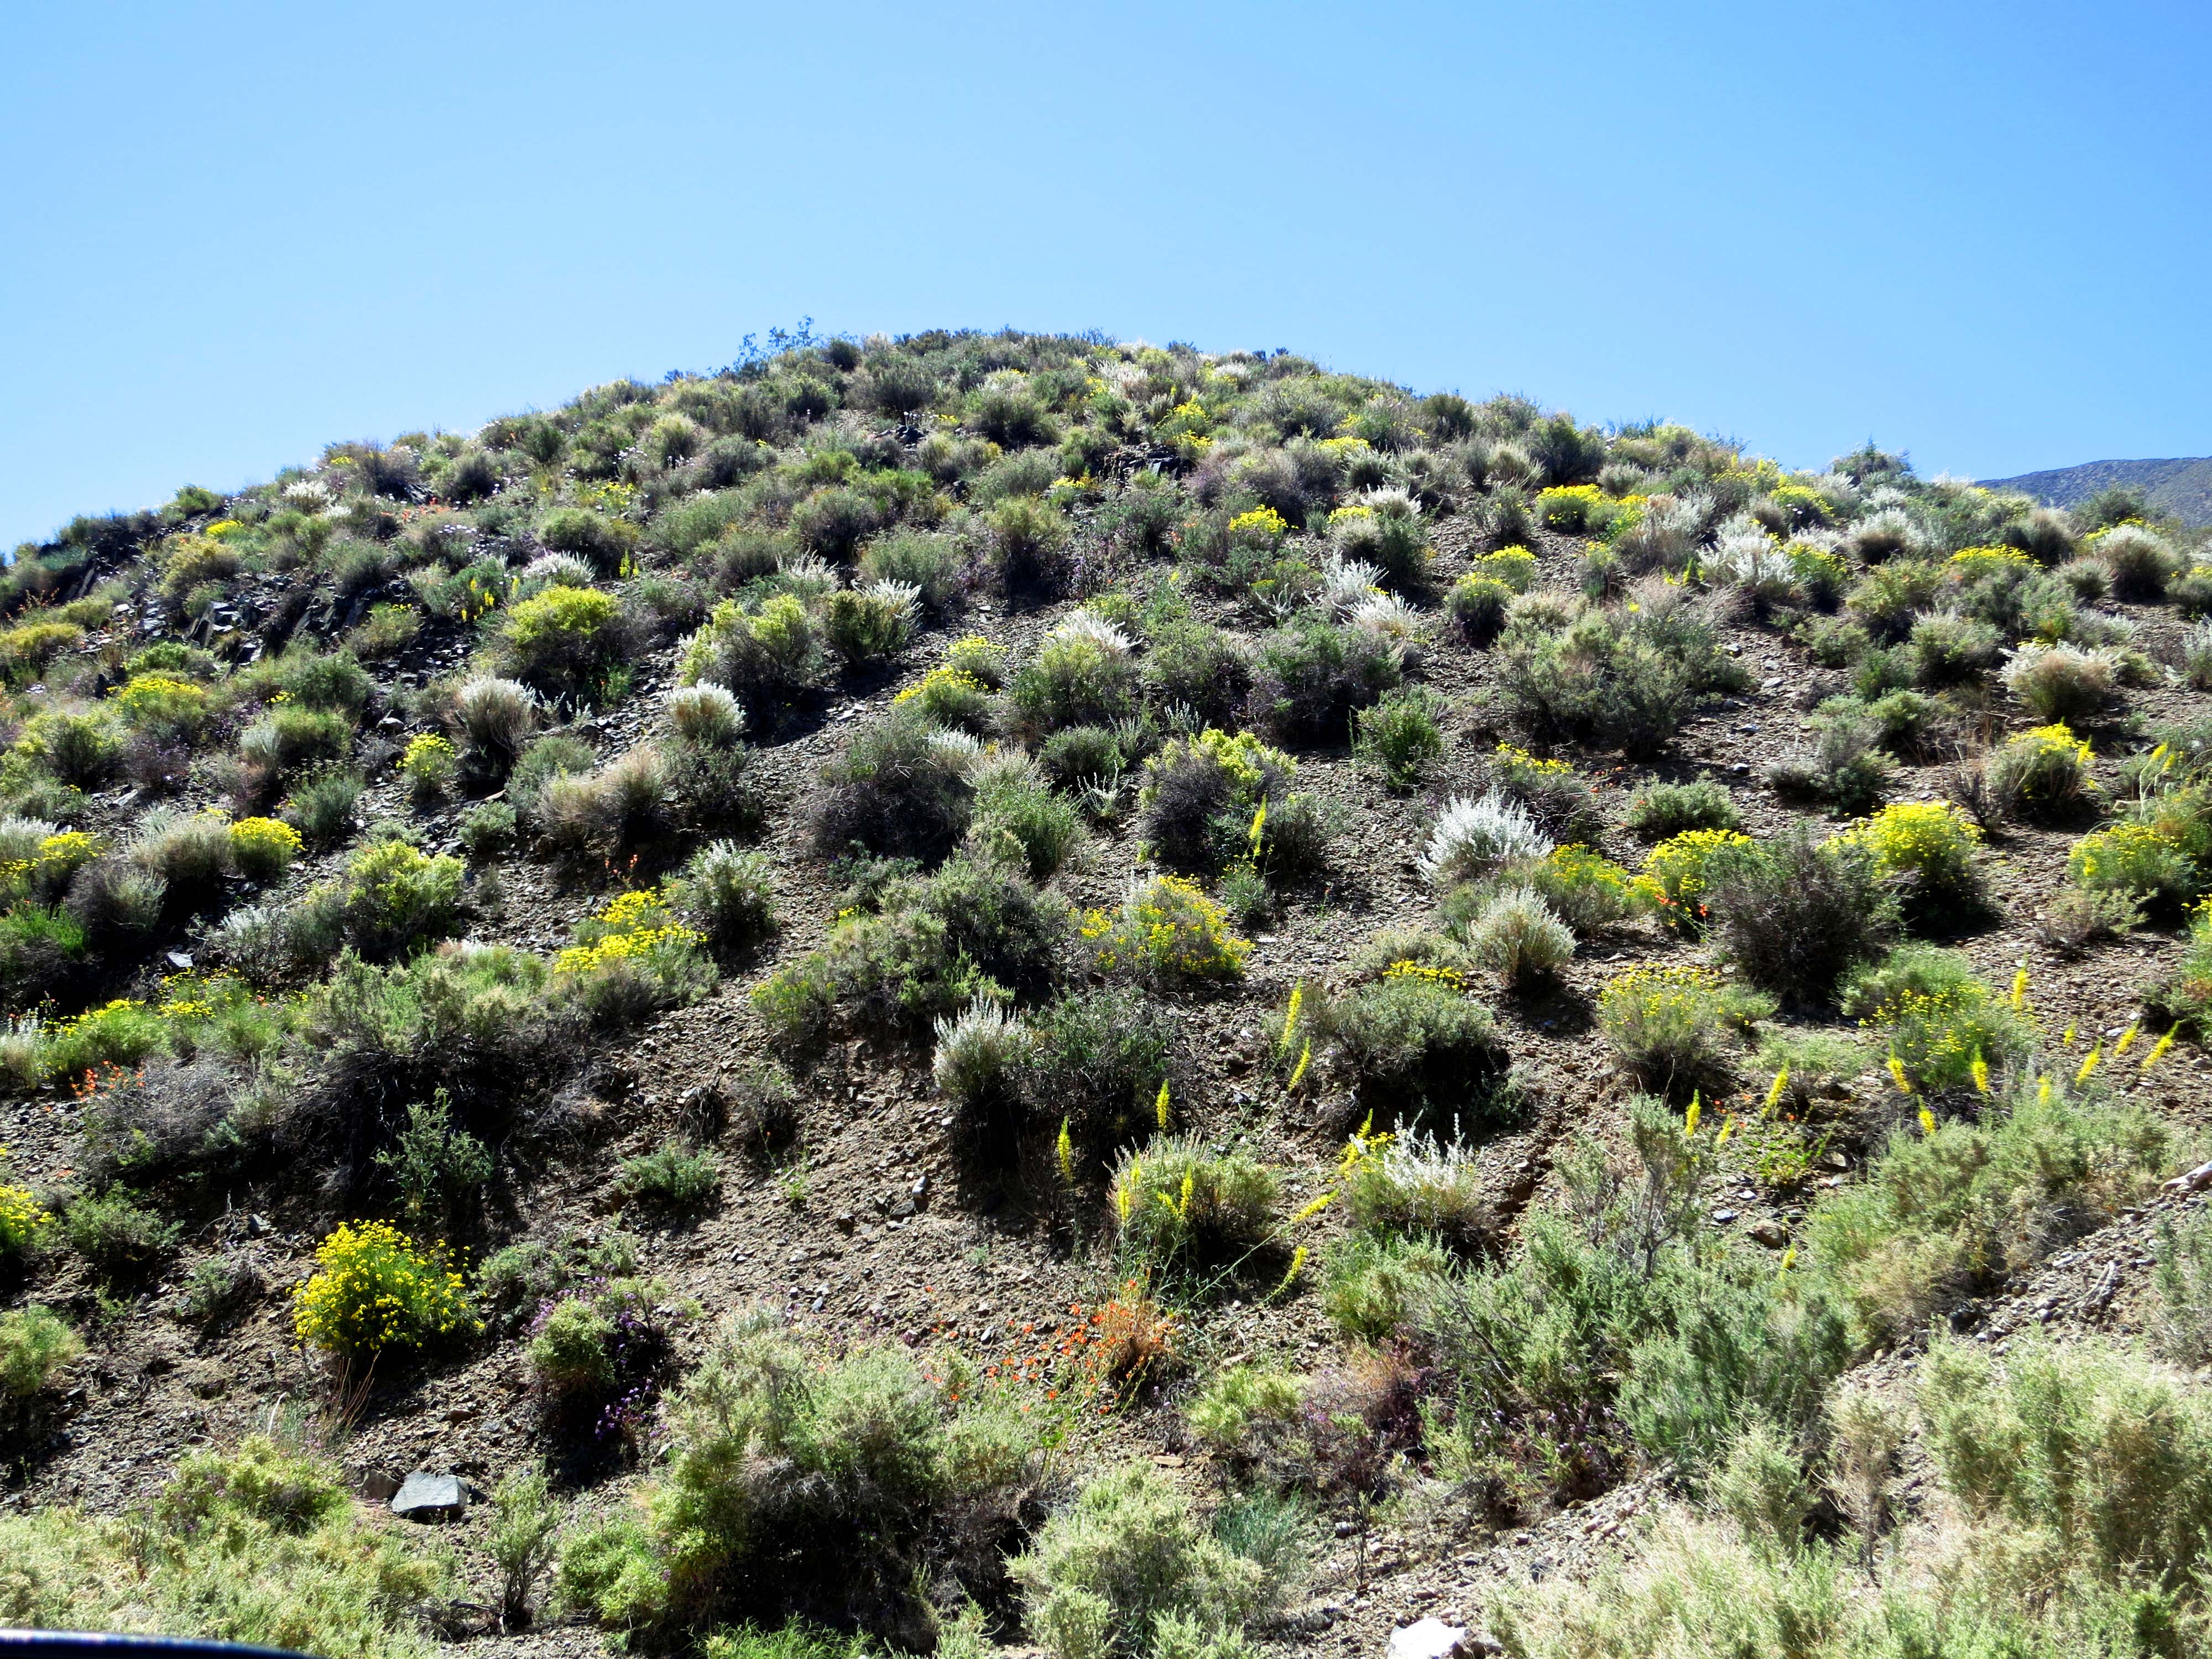 Hill covered with flowers in the Panamint Range of Death Valley.